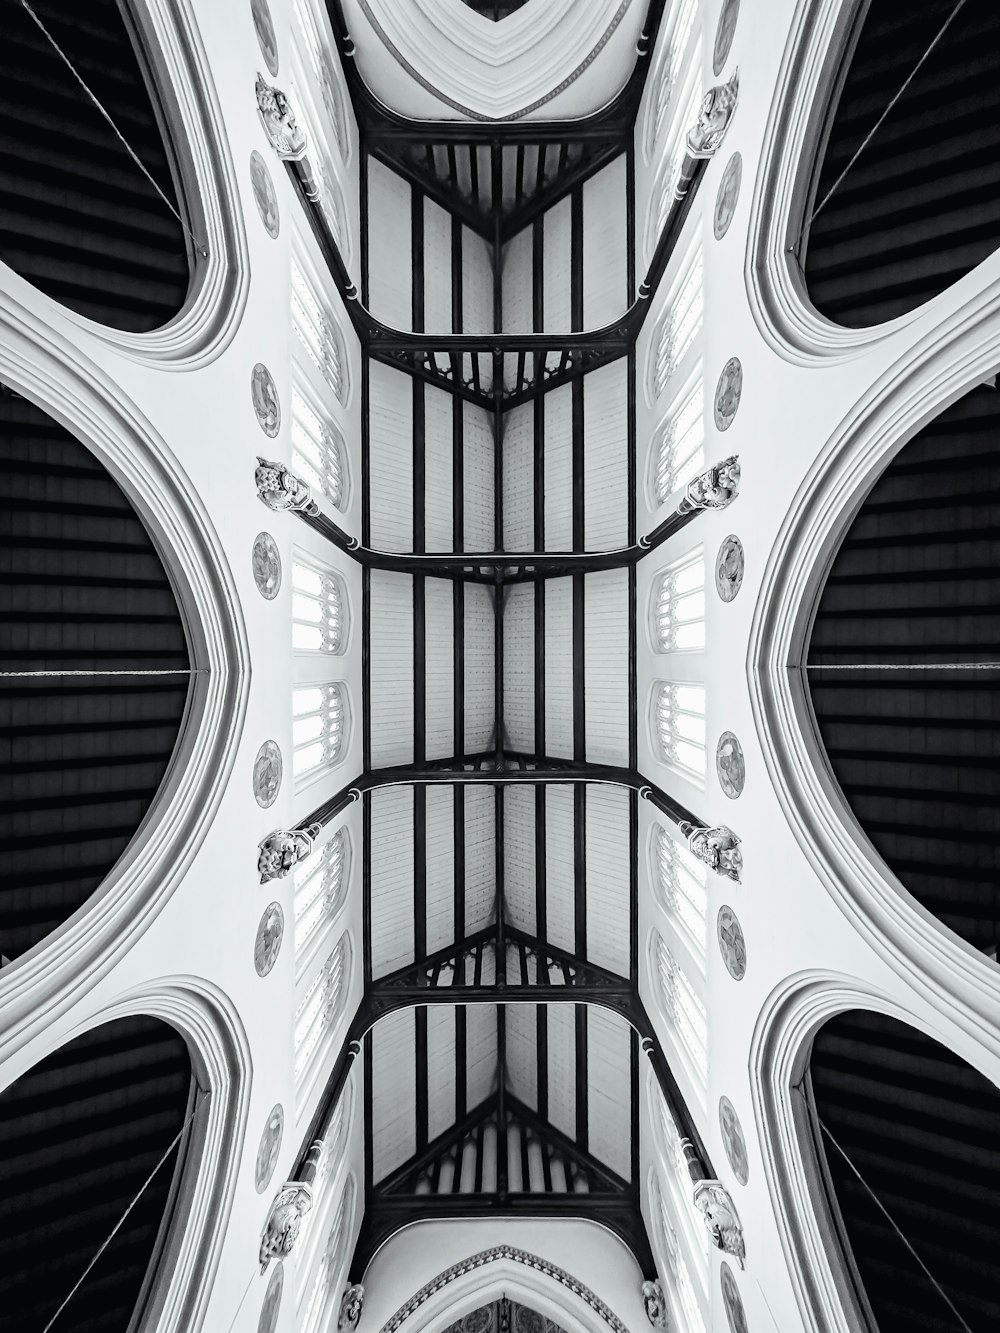 a black and white photo of the ceiling of a building